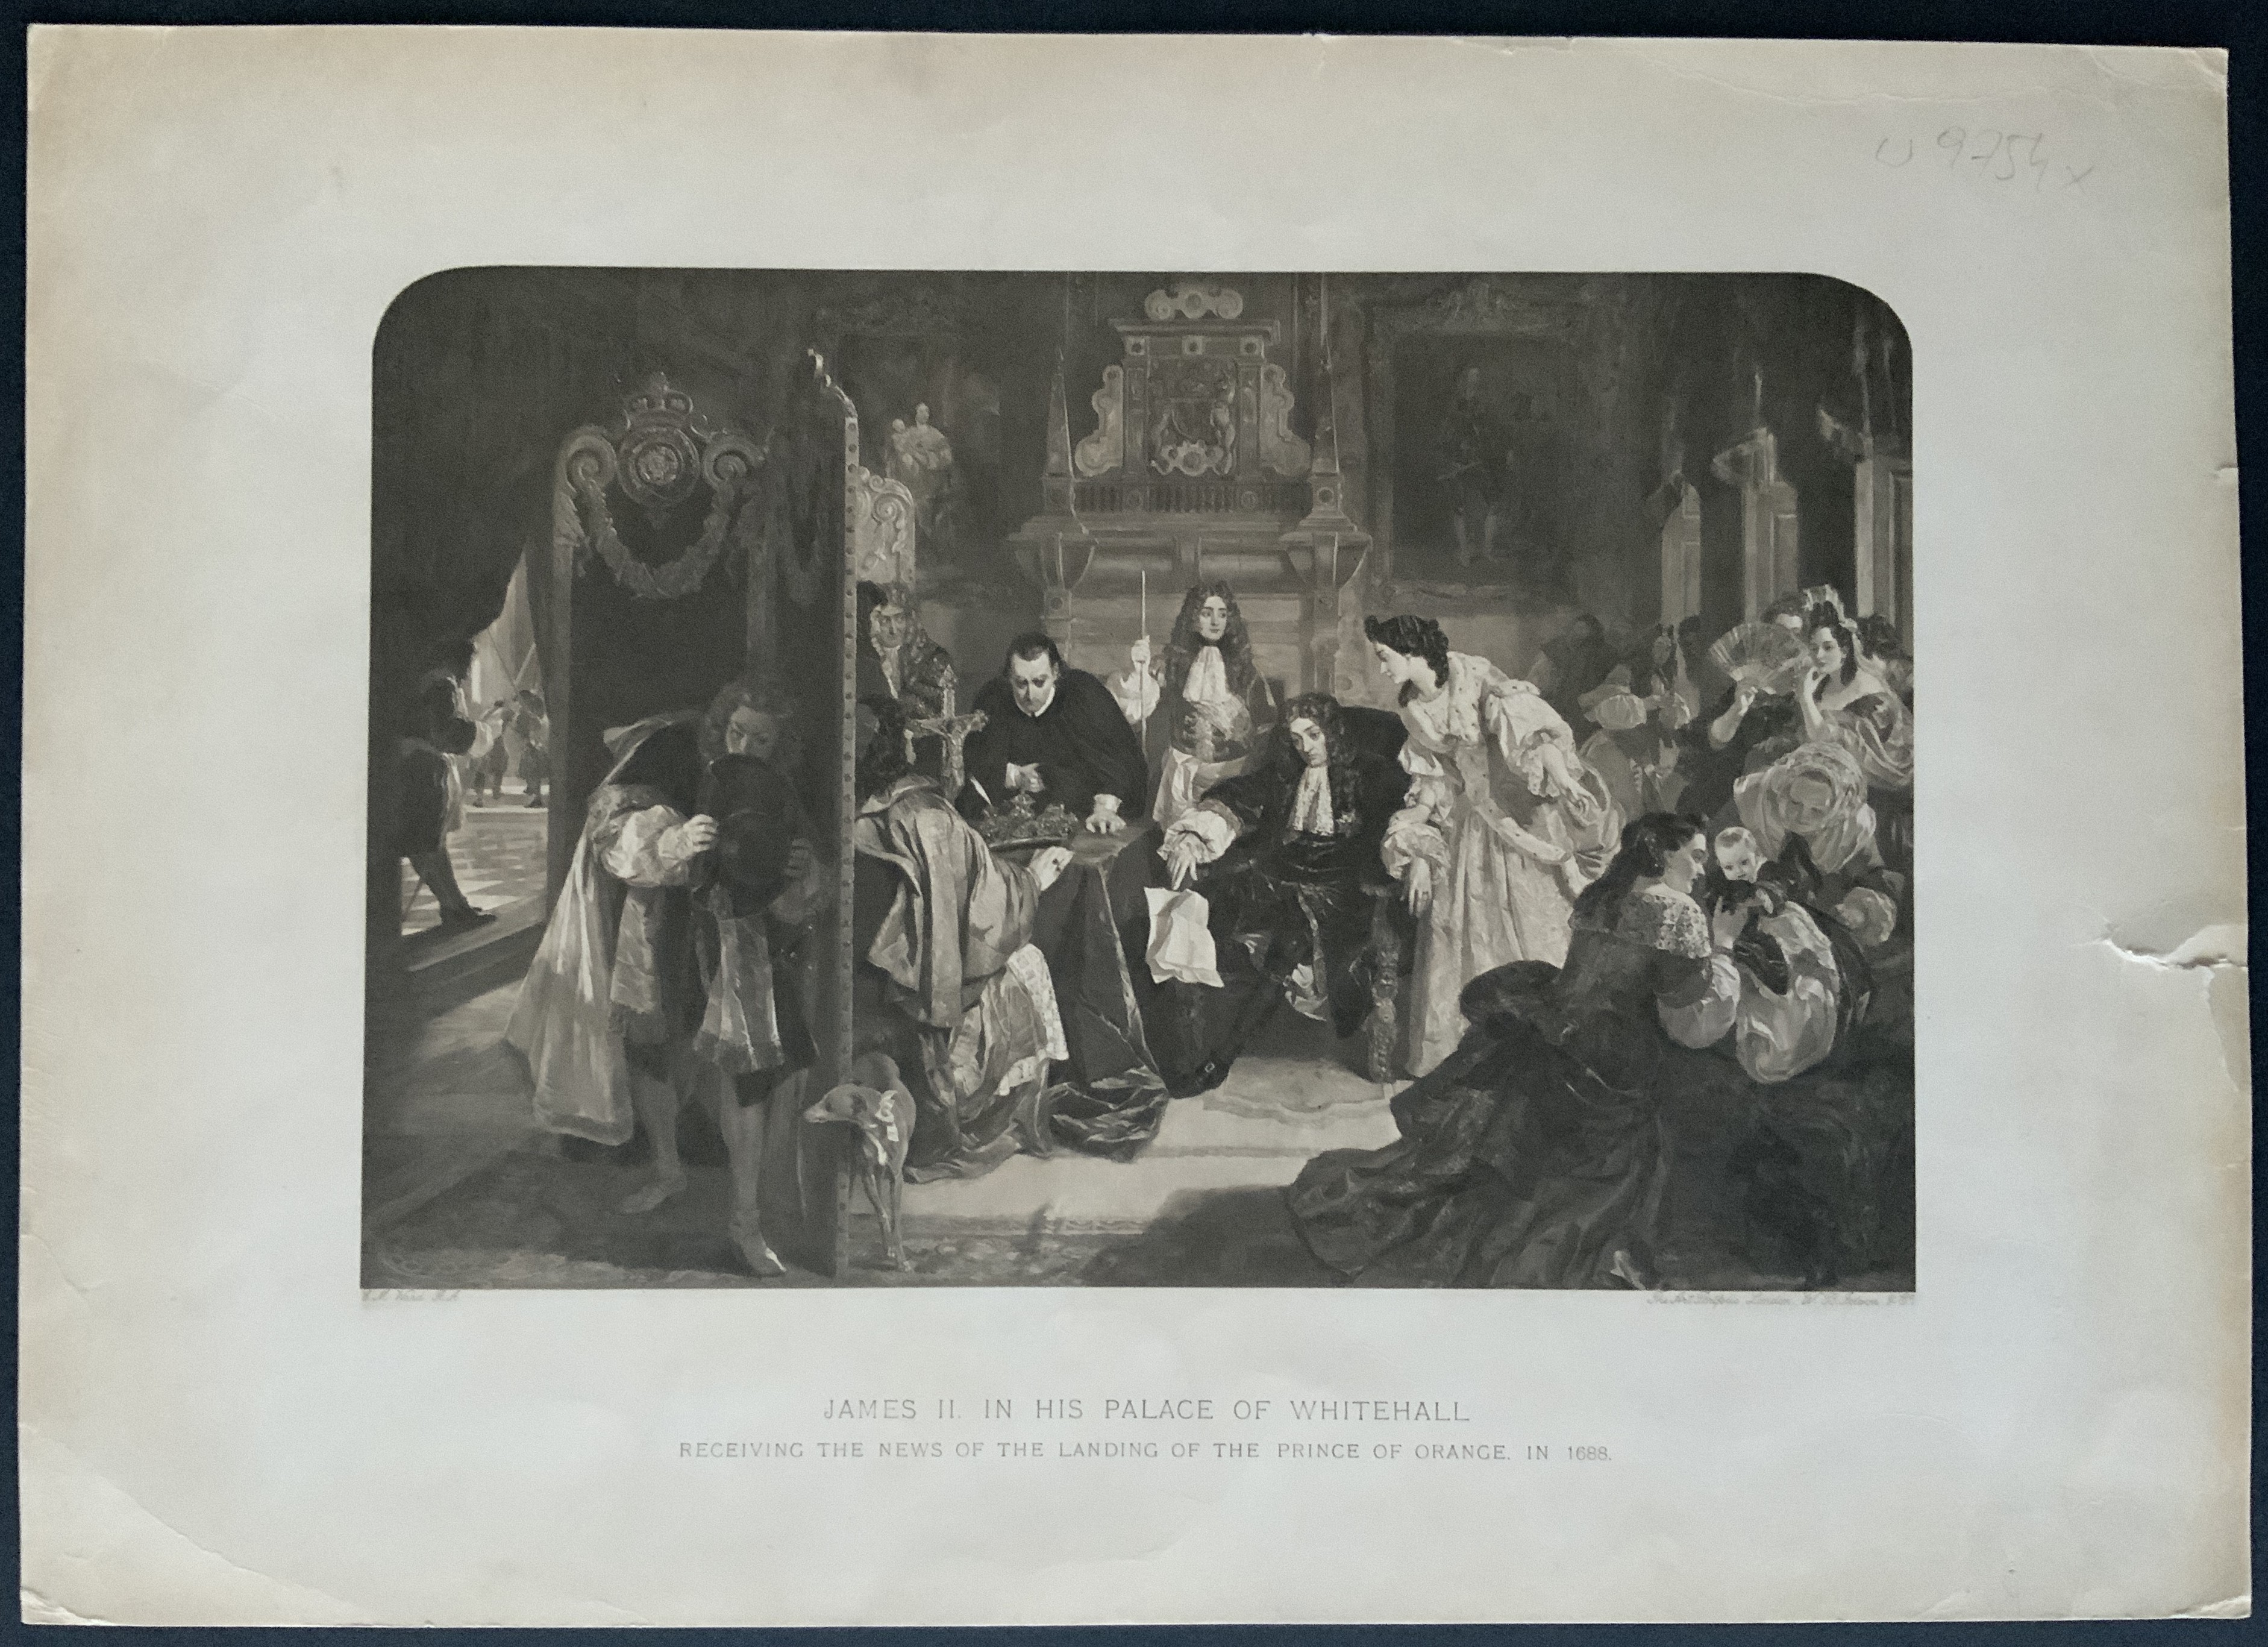 JAMES II IN HIS PALACE OF WHITEHALL ENGRAVING - Image 2 of 3